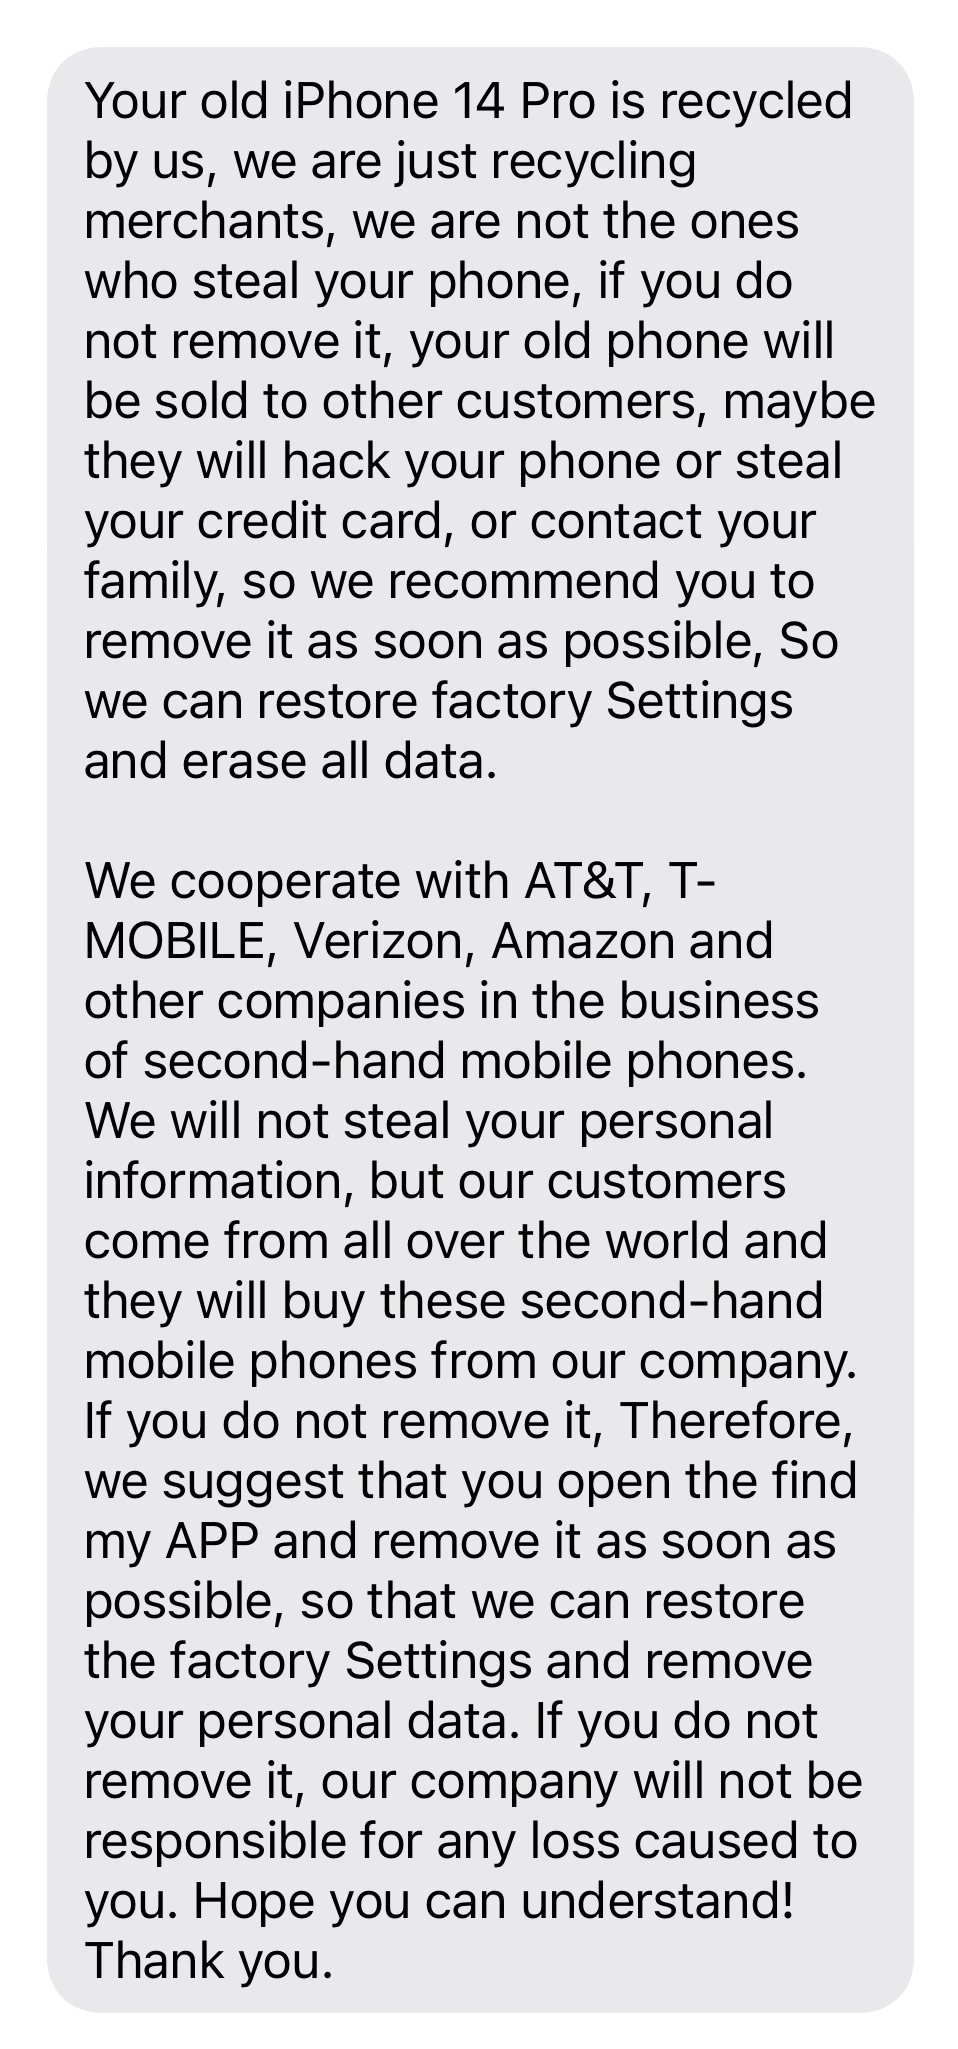 “Your old iPhone 14 Pro is recycled by us, we are just recycling merchants, we are not the ones who steal your phone, if you do not remove it, your old phone will be sold to other customers, maybe they will hack your phone or steal your credit card, or contact your family, so we recommend you to remove it as soon as possible, So we can restore factory Settings and erase all data.   We cooperate with AT&T, T-MOBILE, Verizon, Amazon and other companies in the business of second-hand mobile phones. We will not steal your personal information, but our customers come from all over the world and they will buy these second-hand mobile phones from our company. If you do not remove it, Therefore, we suggest that you open the find my APP and remove it as soon as possible, so that we can restore the factory Settings and remove your personal data. If you do not remove it, our company will not be responsible for any loss caused to you. Hope you can understand! Thank you.”